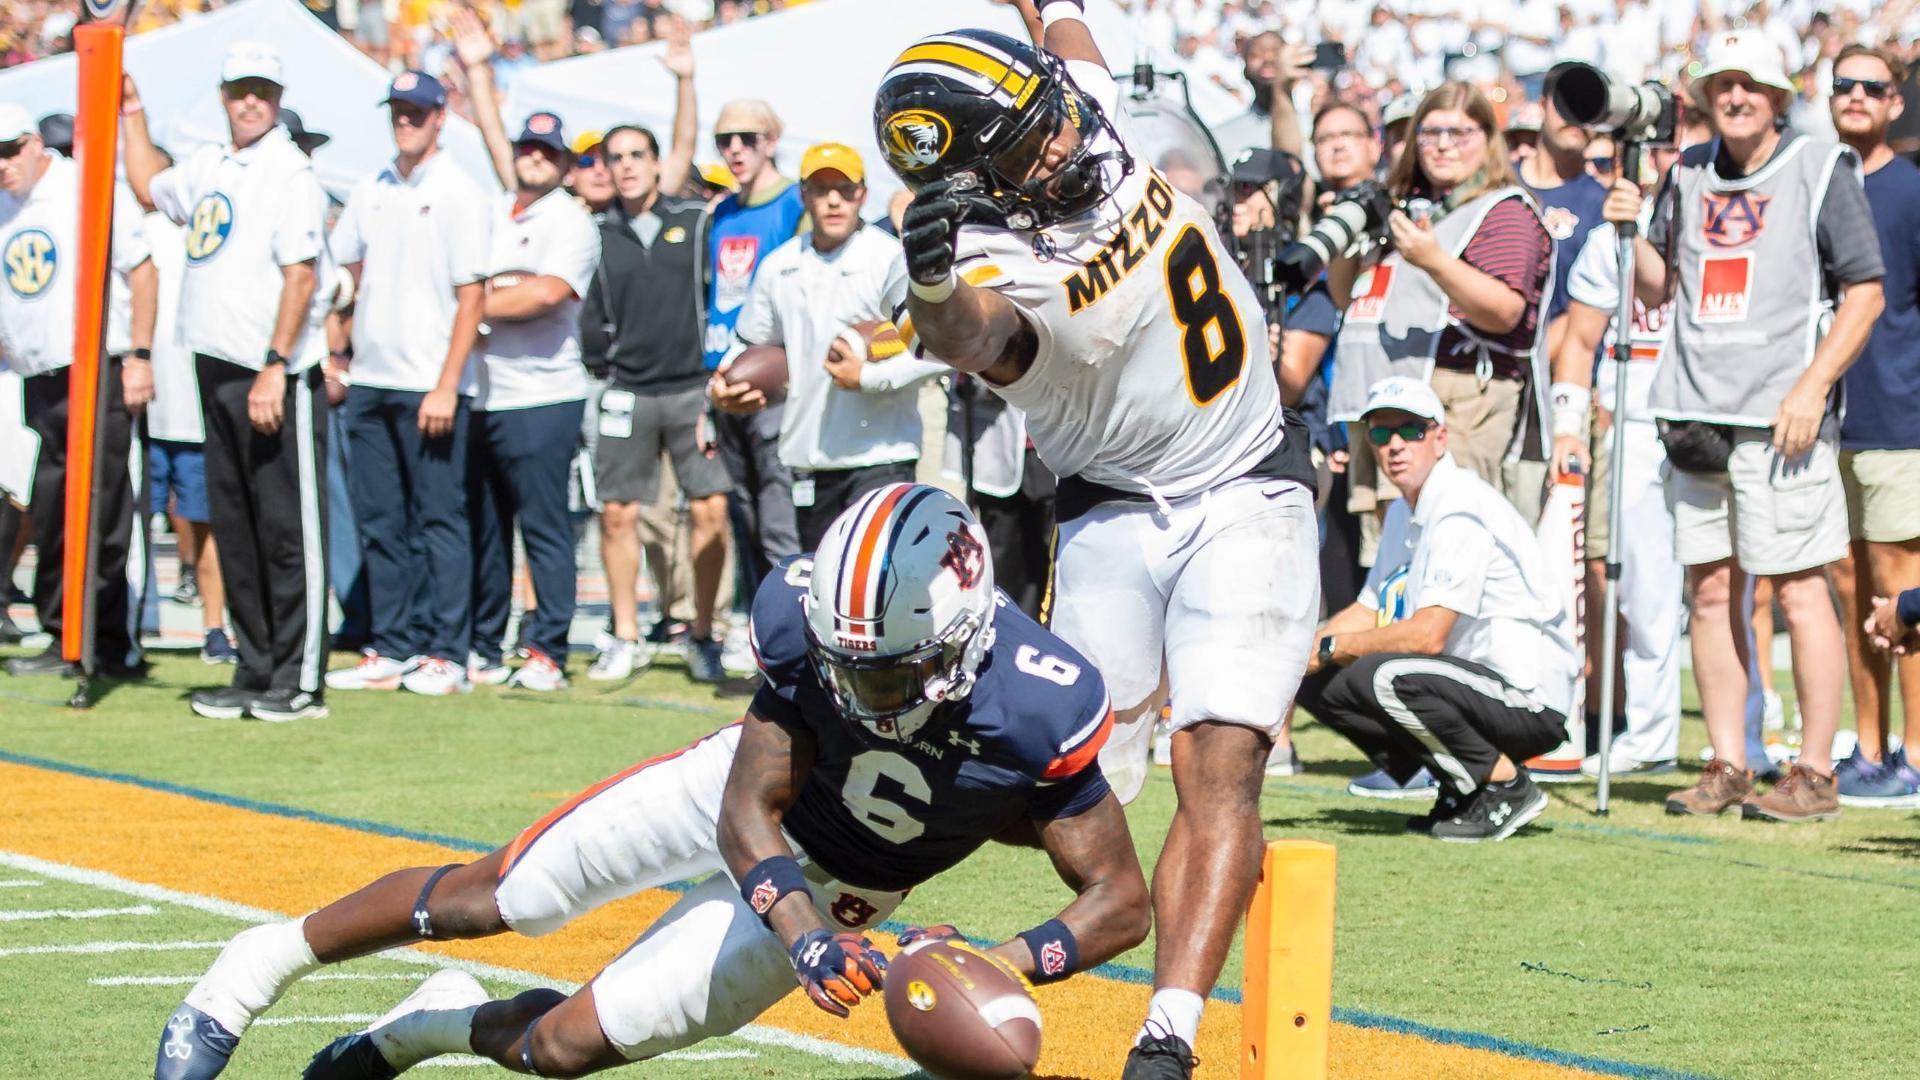 Missouri RB fumbles at goal line in OT, gifting win to Auburn